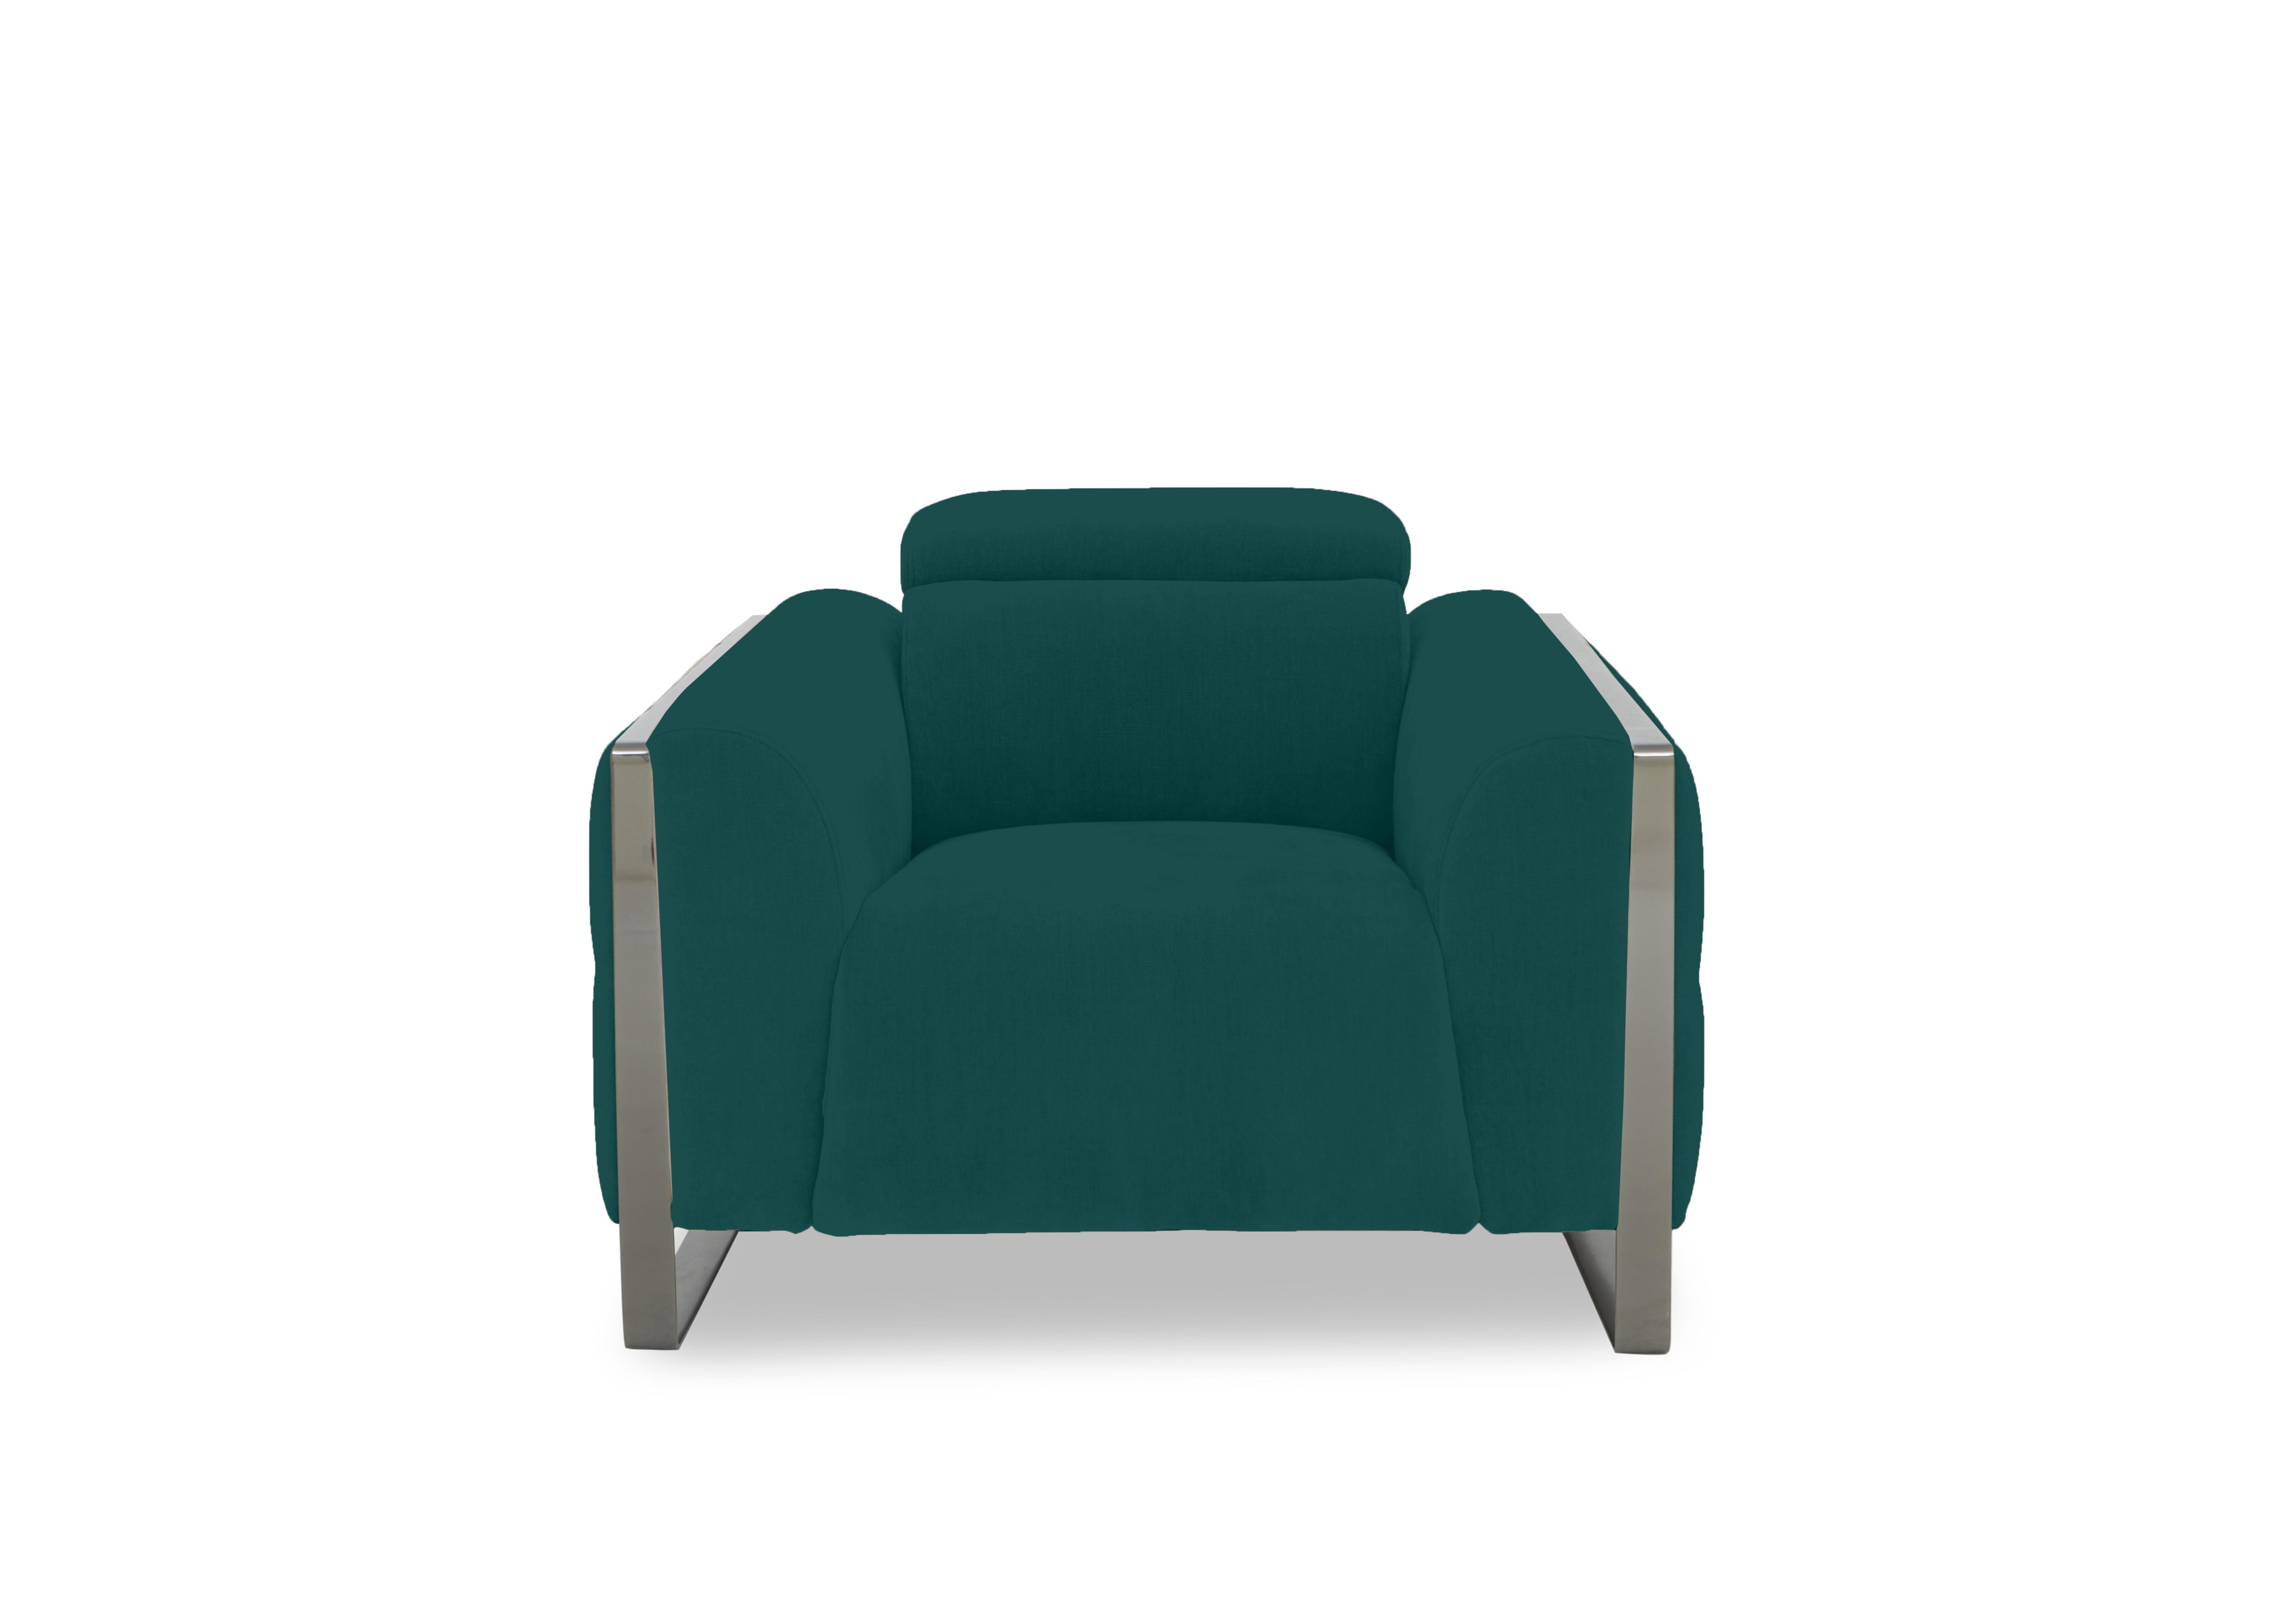 Gisella Fabric Chair in Opulence Teal 51003 on Furniture Village